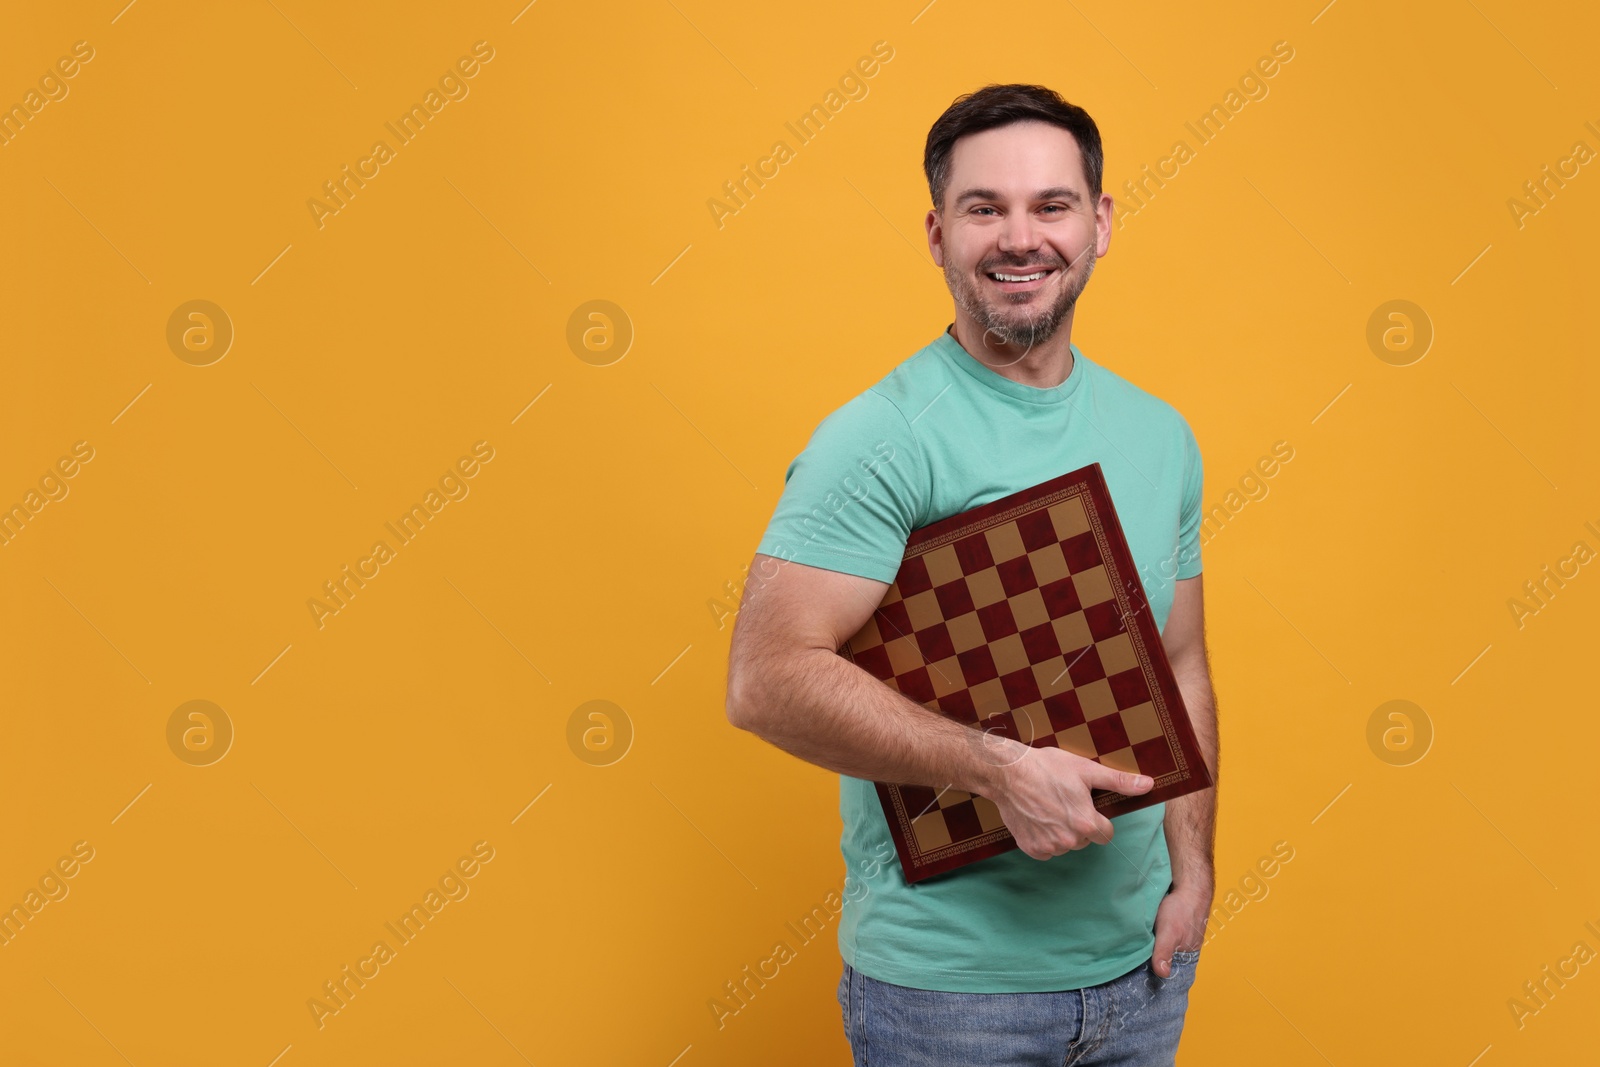 Photo of Smiling man holding chessboard on orange background, space for text